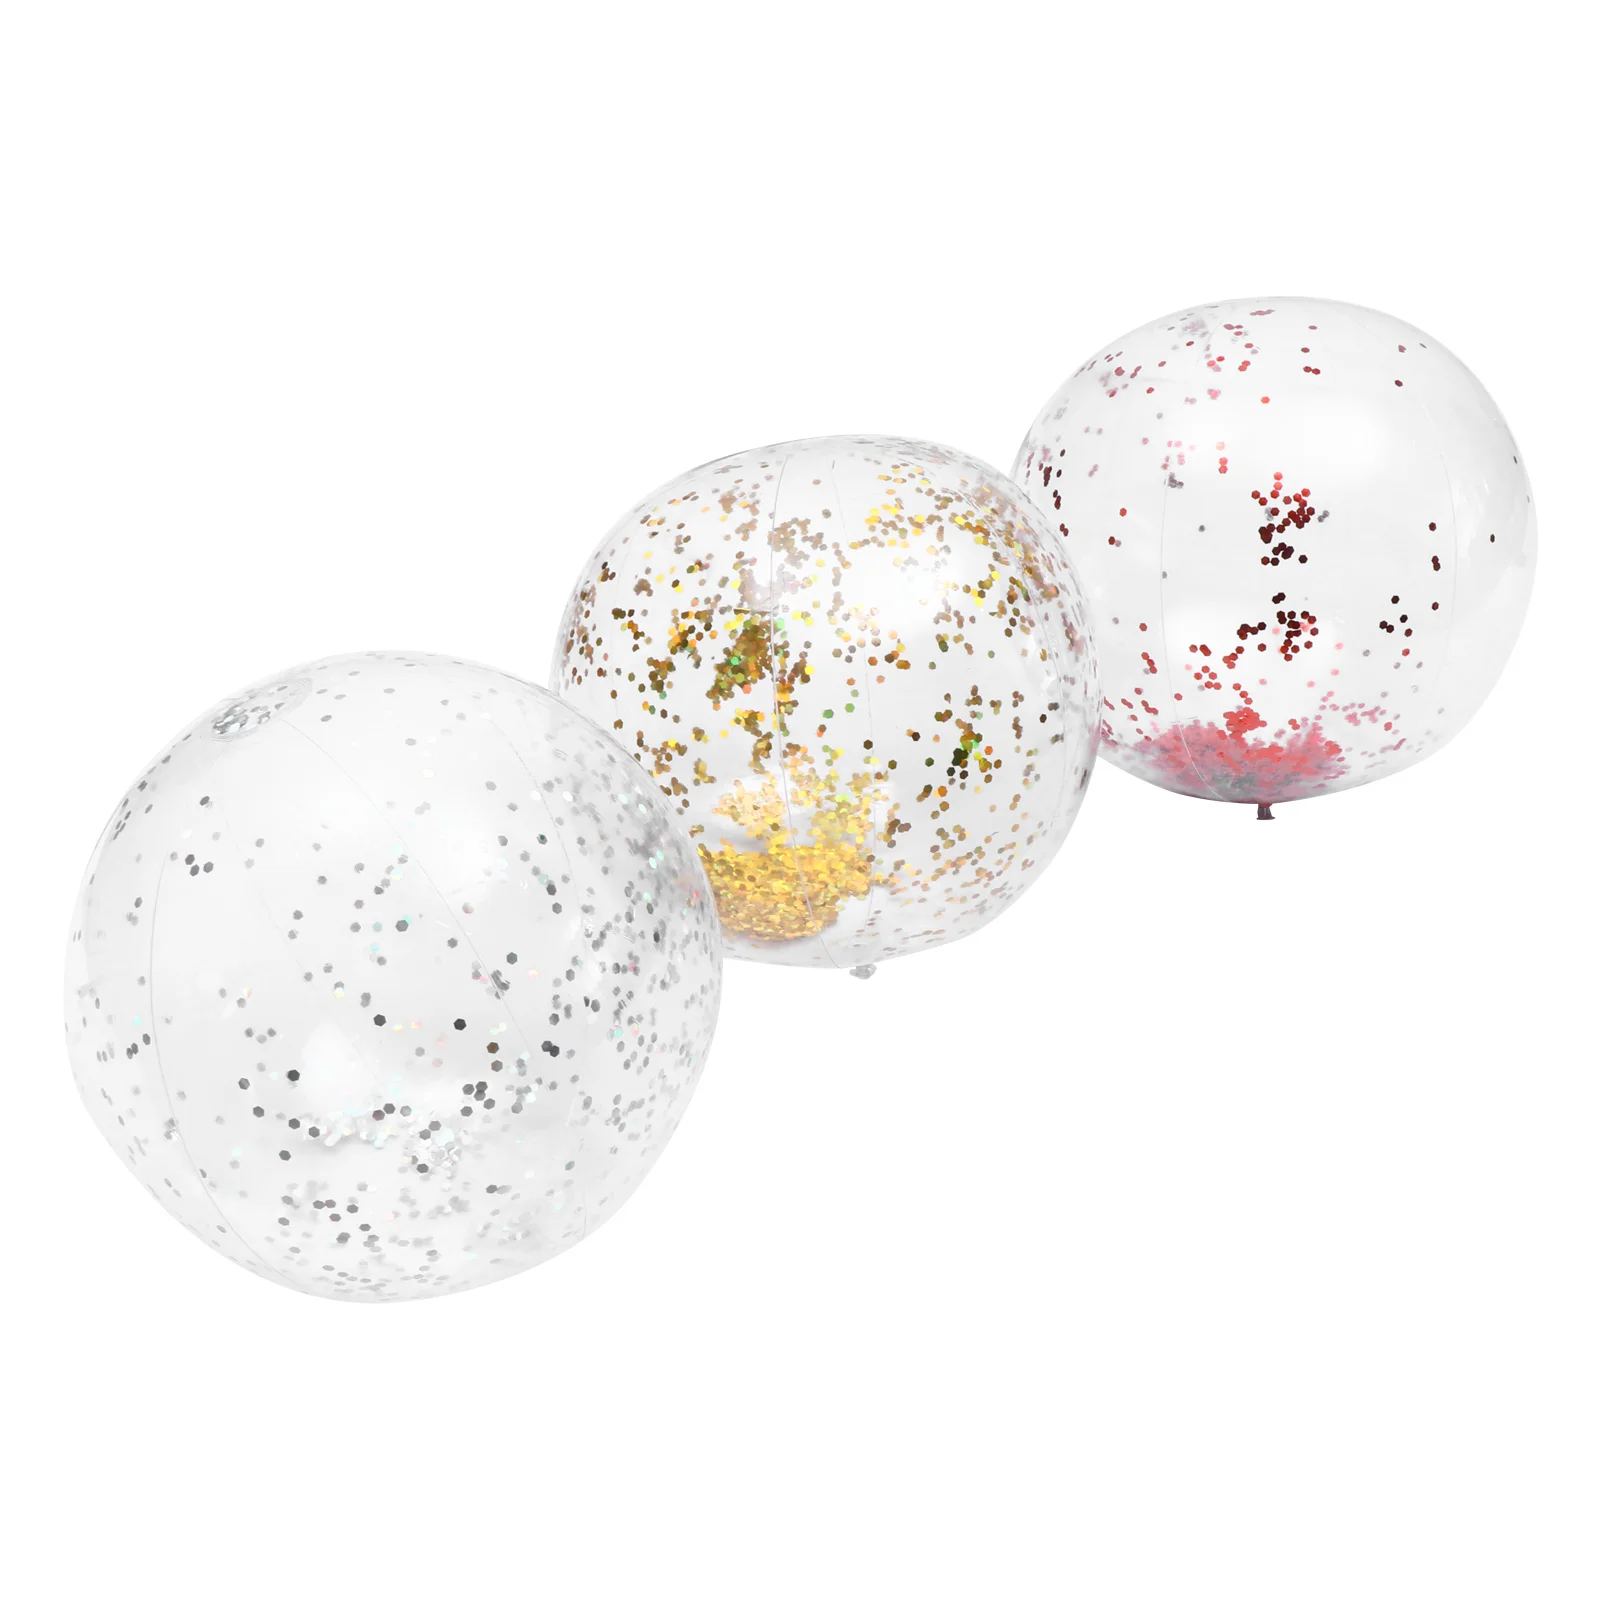 3 Pcs Inflatable Beach Ball Sequin Toy Swimming Pool Toys Flash PVC Inte... - $19.60